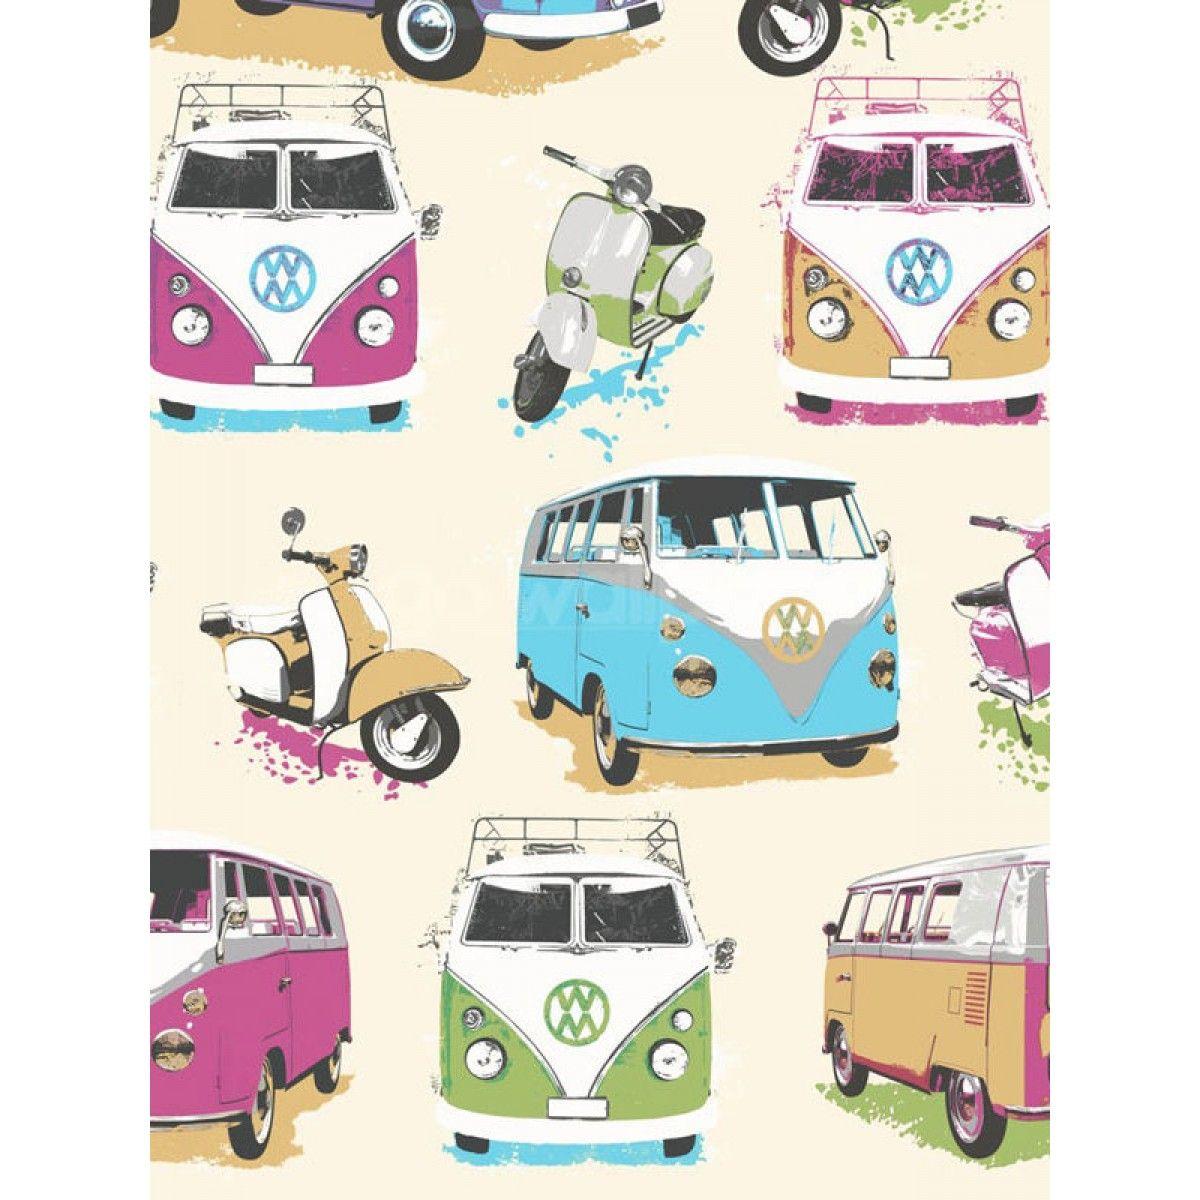 Officially licensed VW™ wallpaper Featuring cool campervans